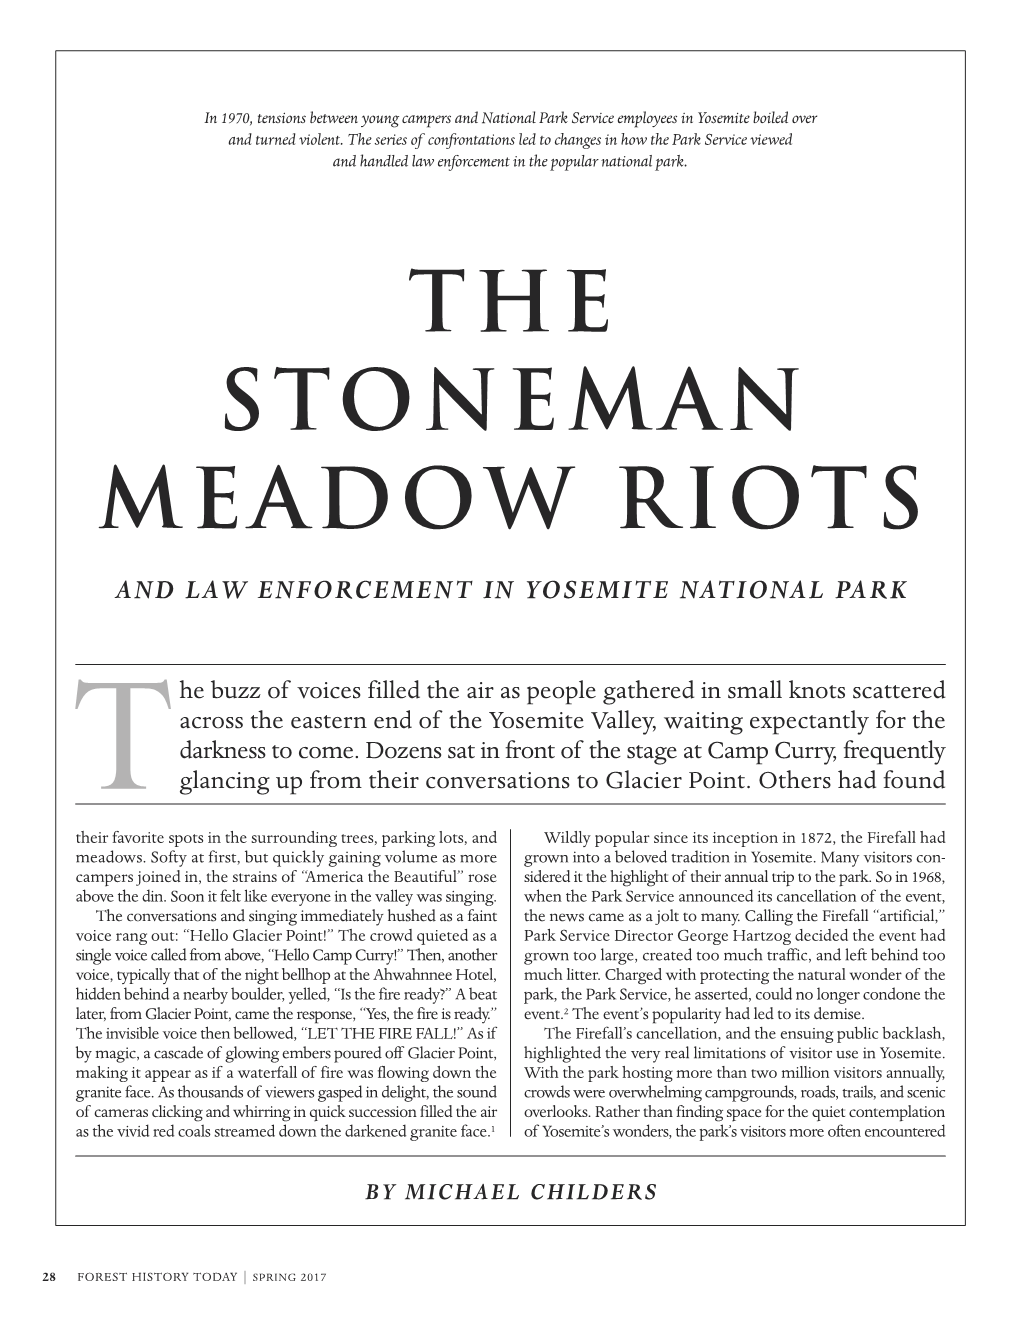 The Stoneman Meadow Riots and Law Enforcement in Yosemite